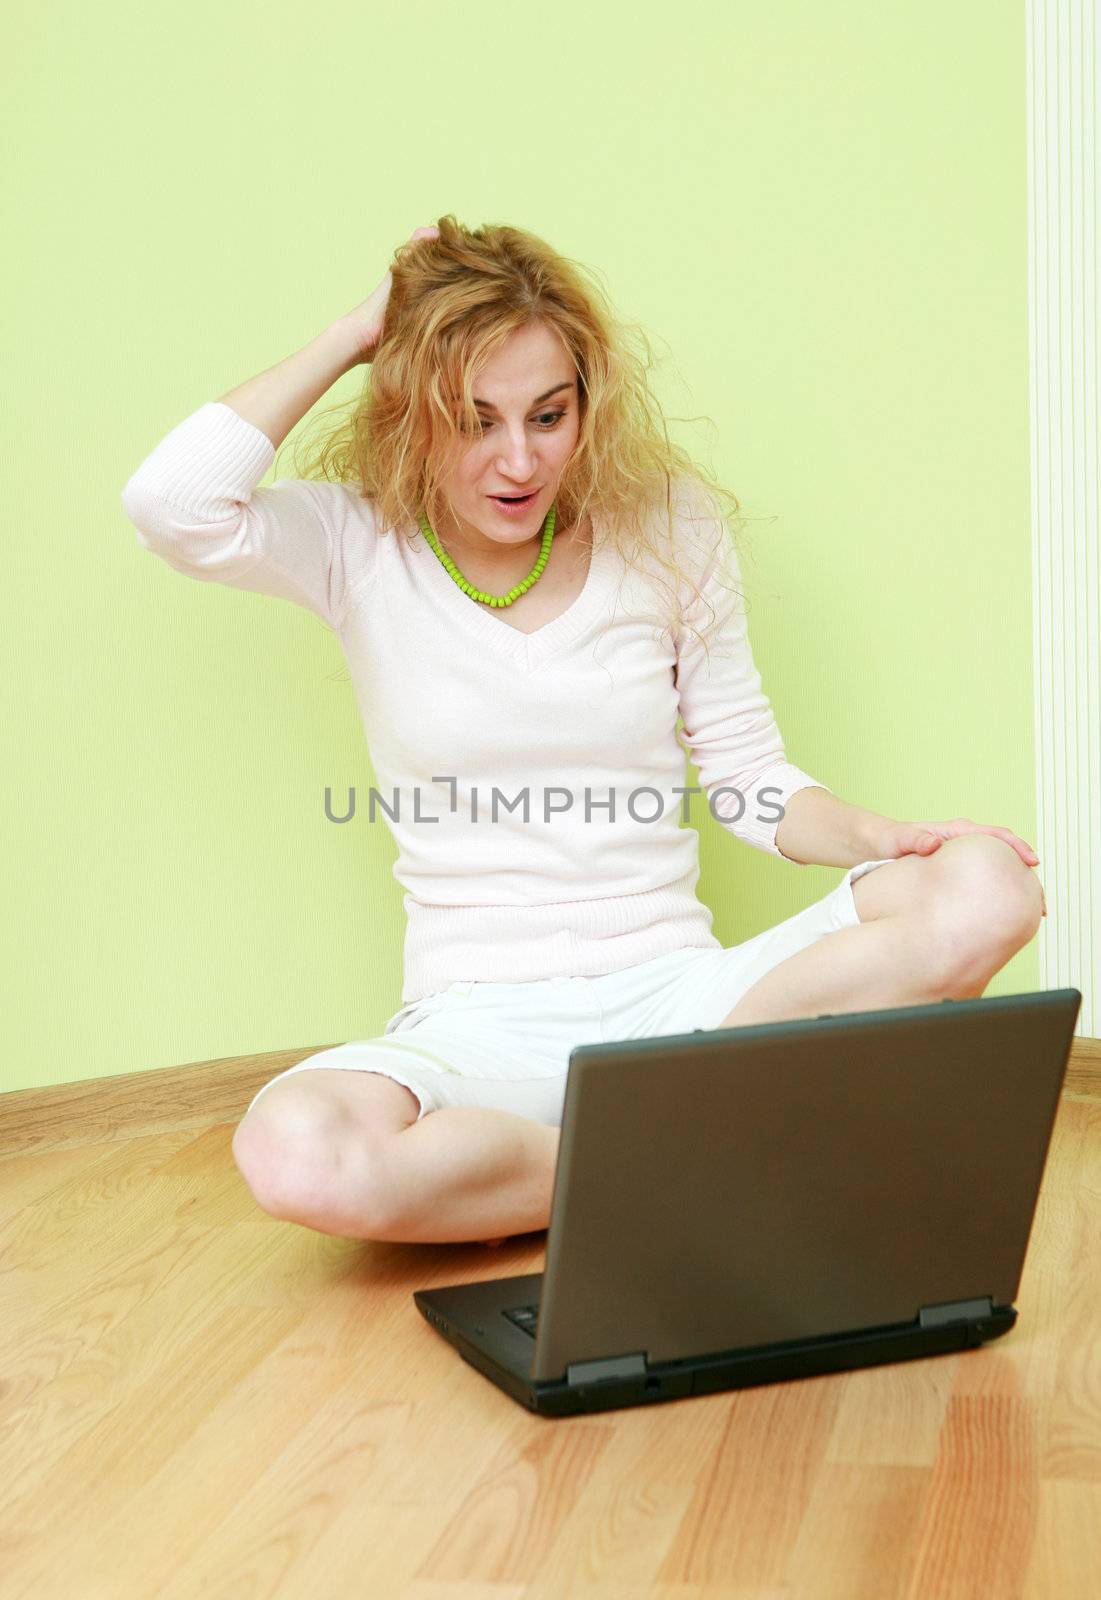 An image of a girl with a laptop on floor